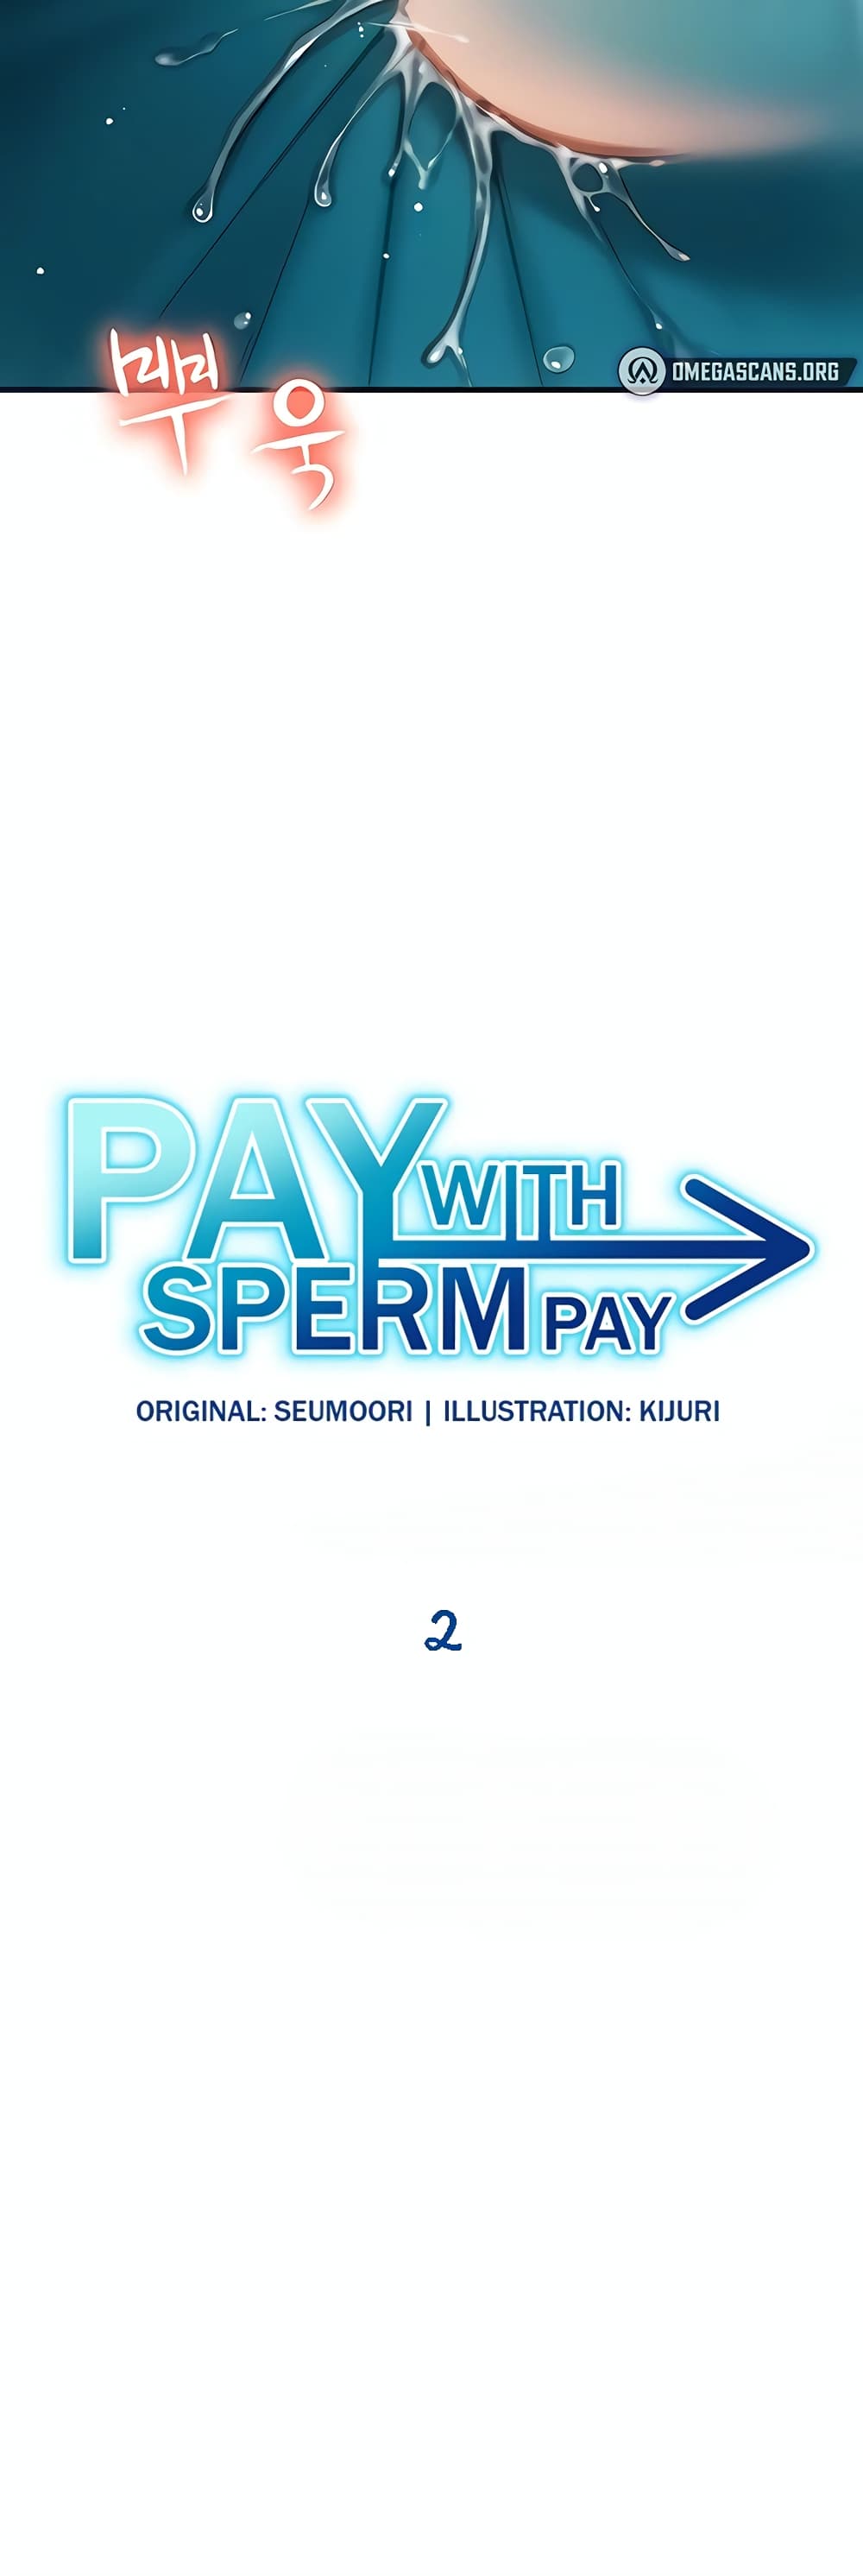 Pay with Sperm Pay 2 02